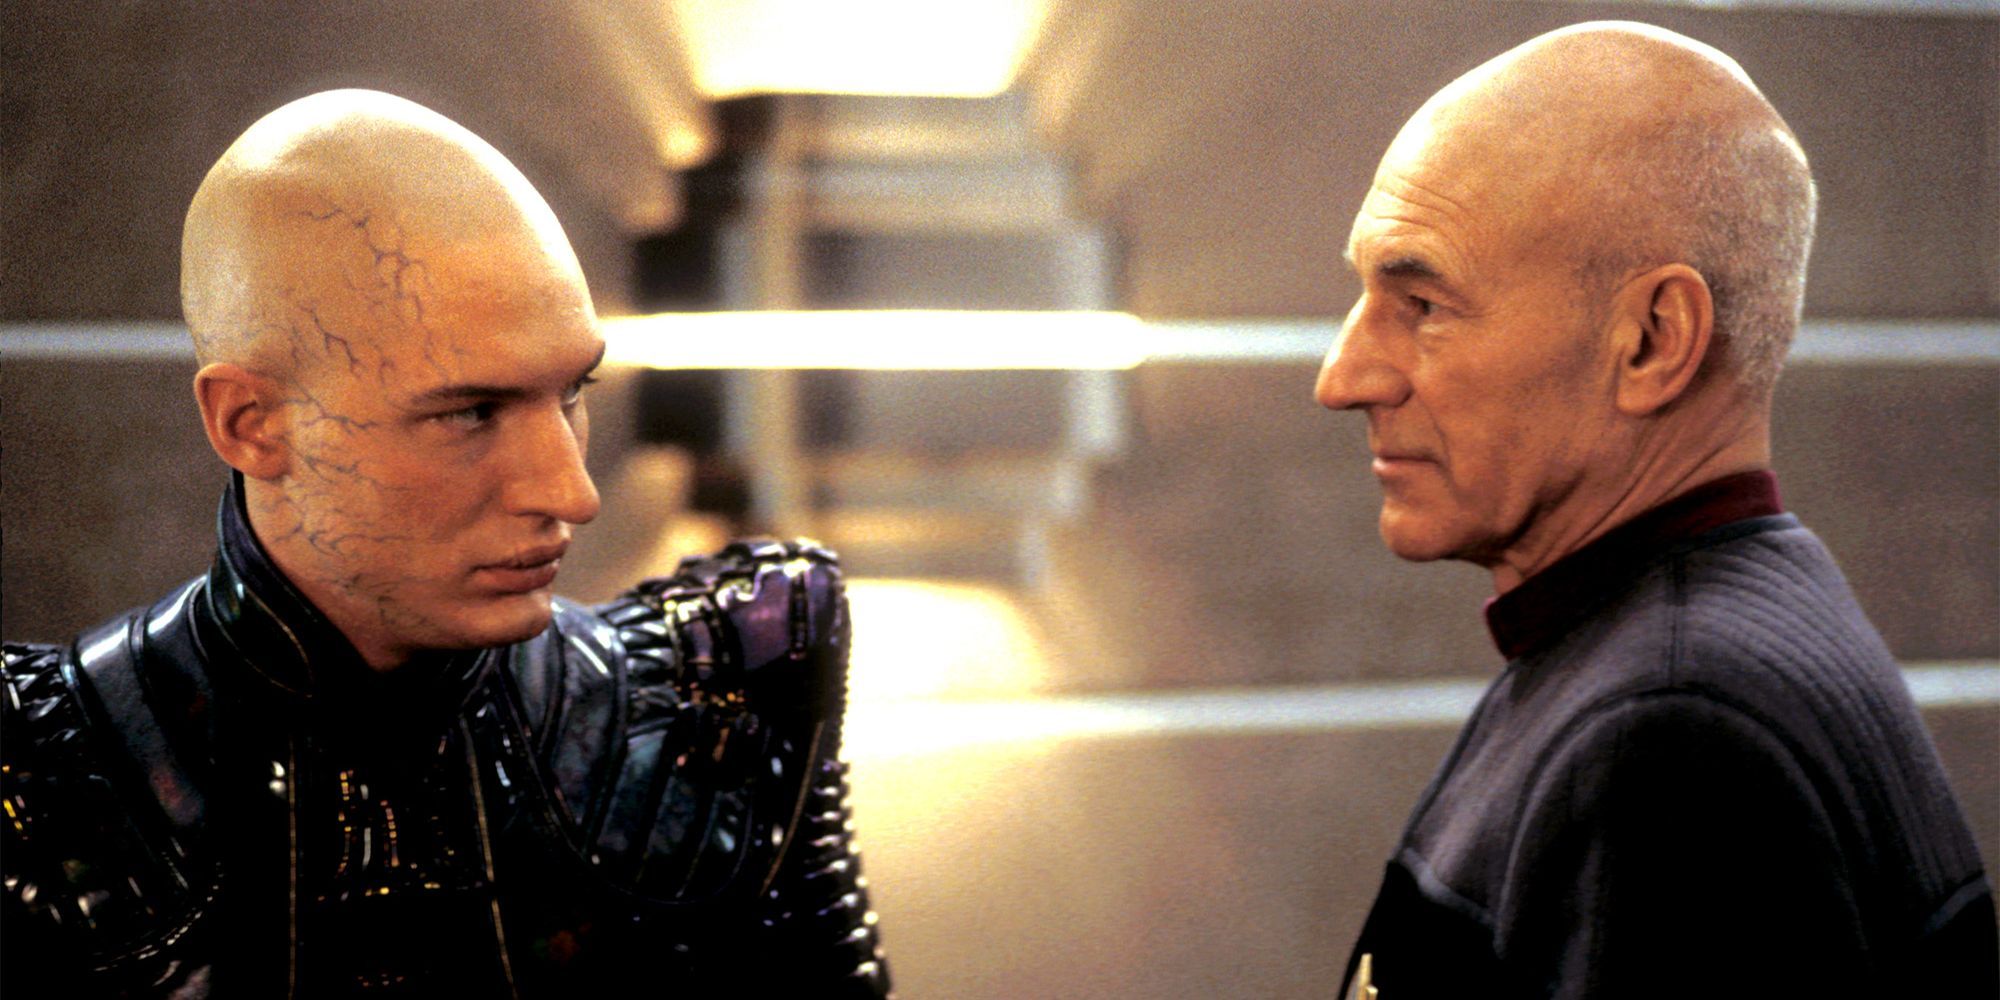 Tom Hardy and Patrick Stewart looking at each other in Star Trek: Nemesis.